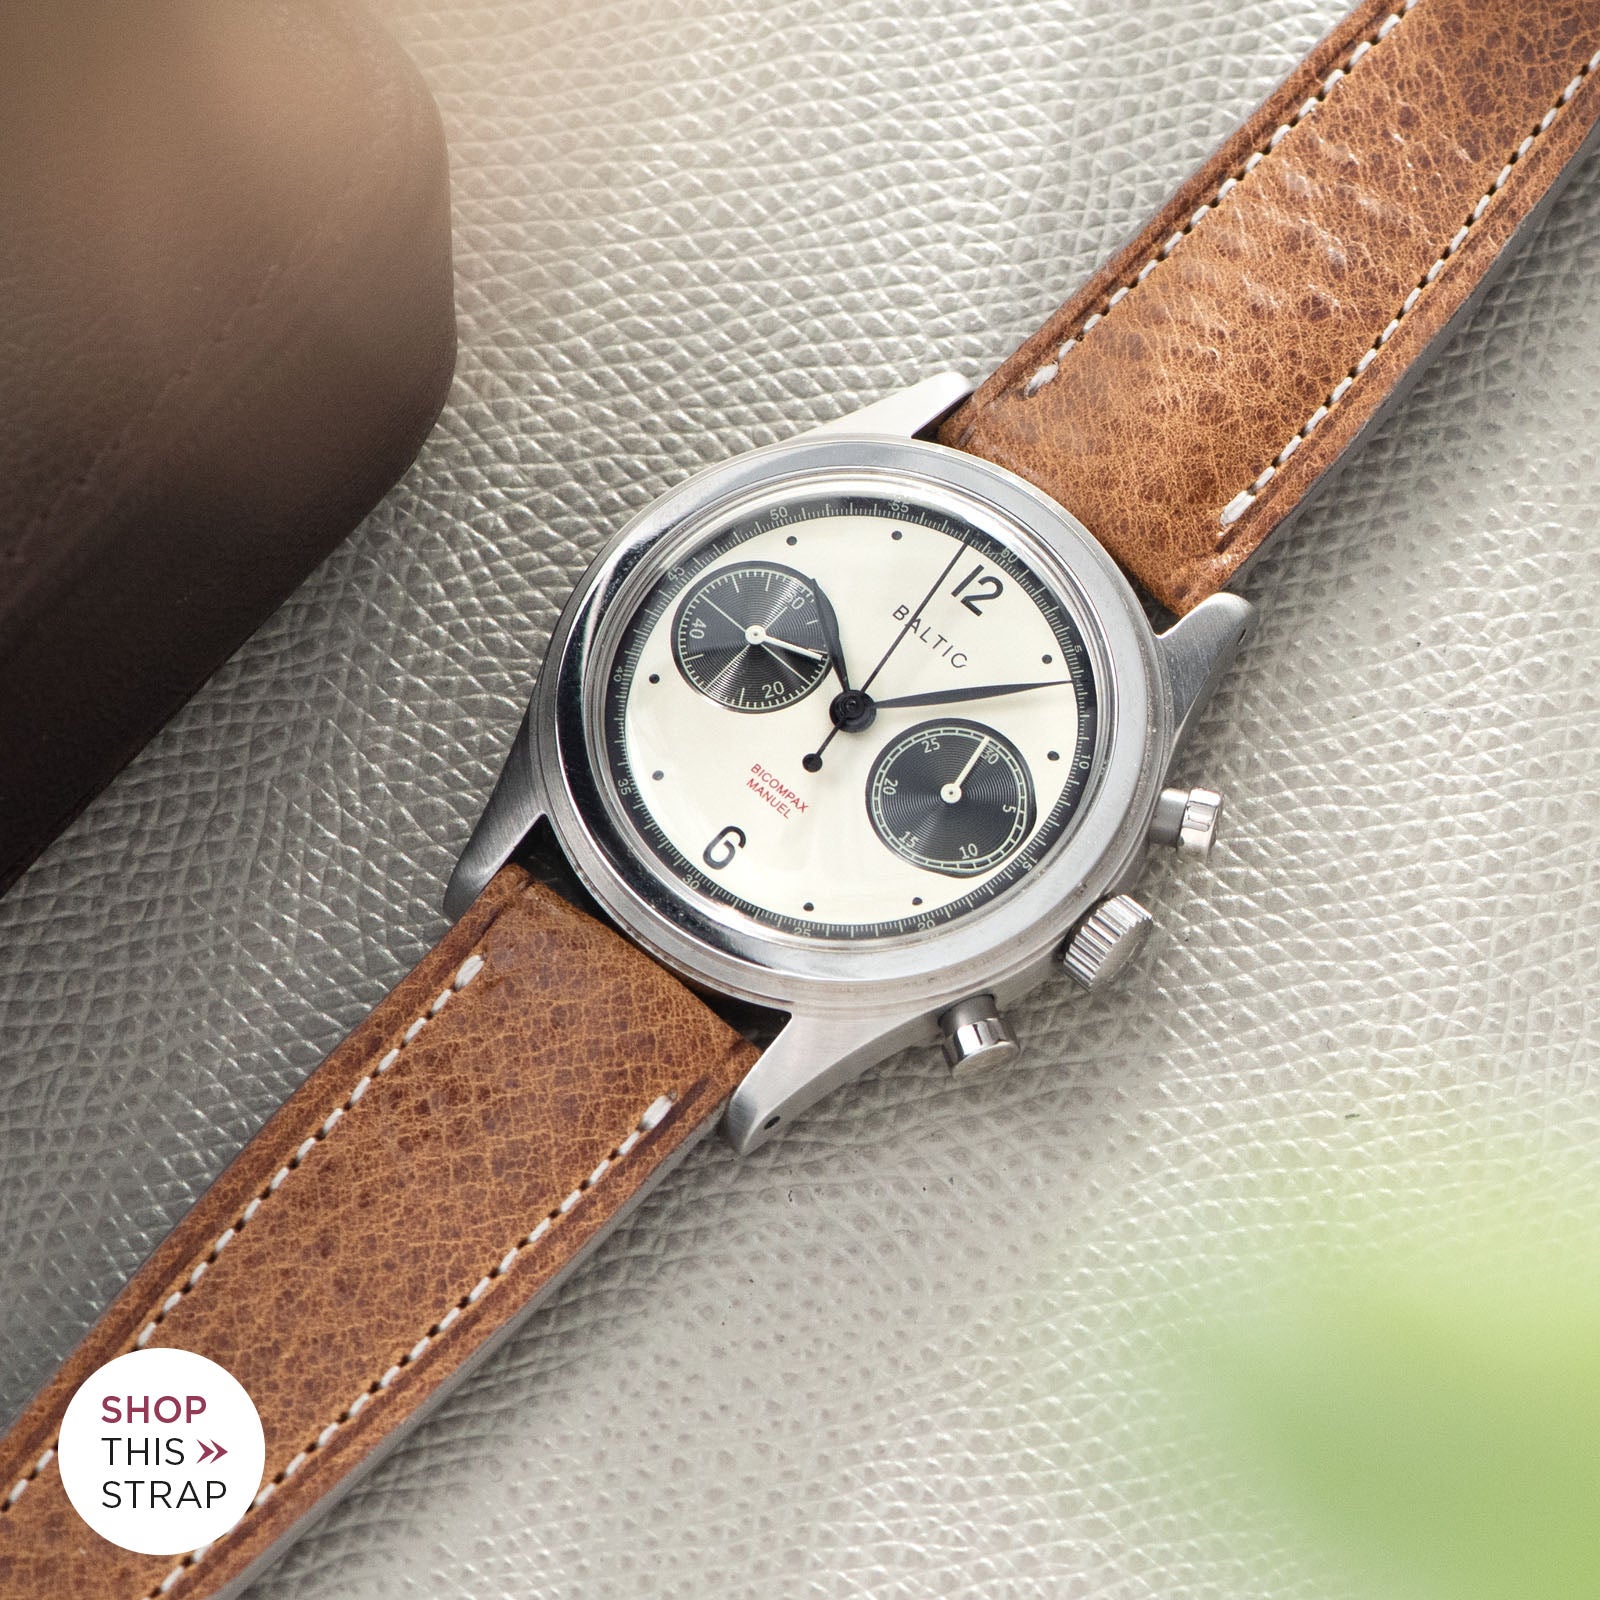 Bulang and Sons_Strap Guide_The Baltic-Chronograph-Panda-Limited-Edition_Bohemien Brown Leather Watch Strap